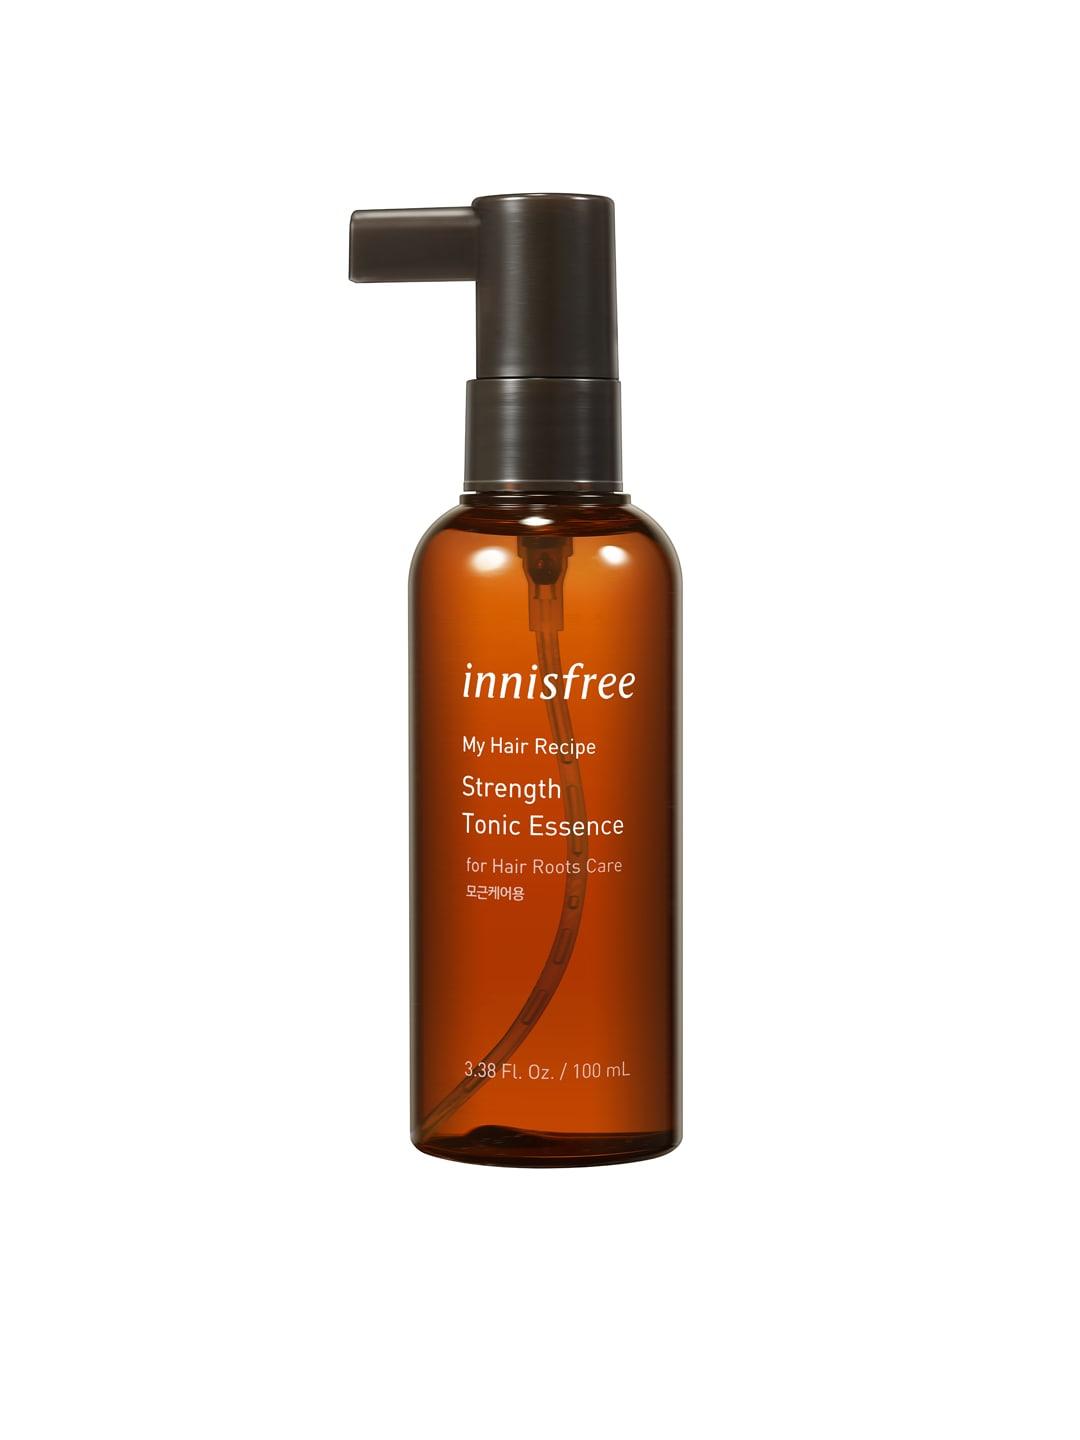 Innisfree My Hair Recipe Strength Tonic Essence for Hair Roots Care - 330 ml